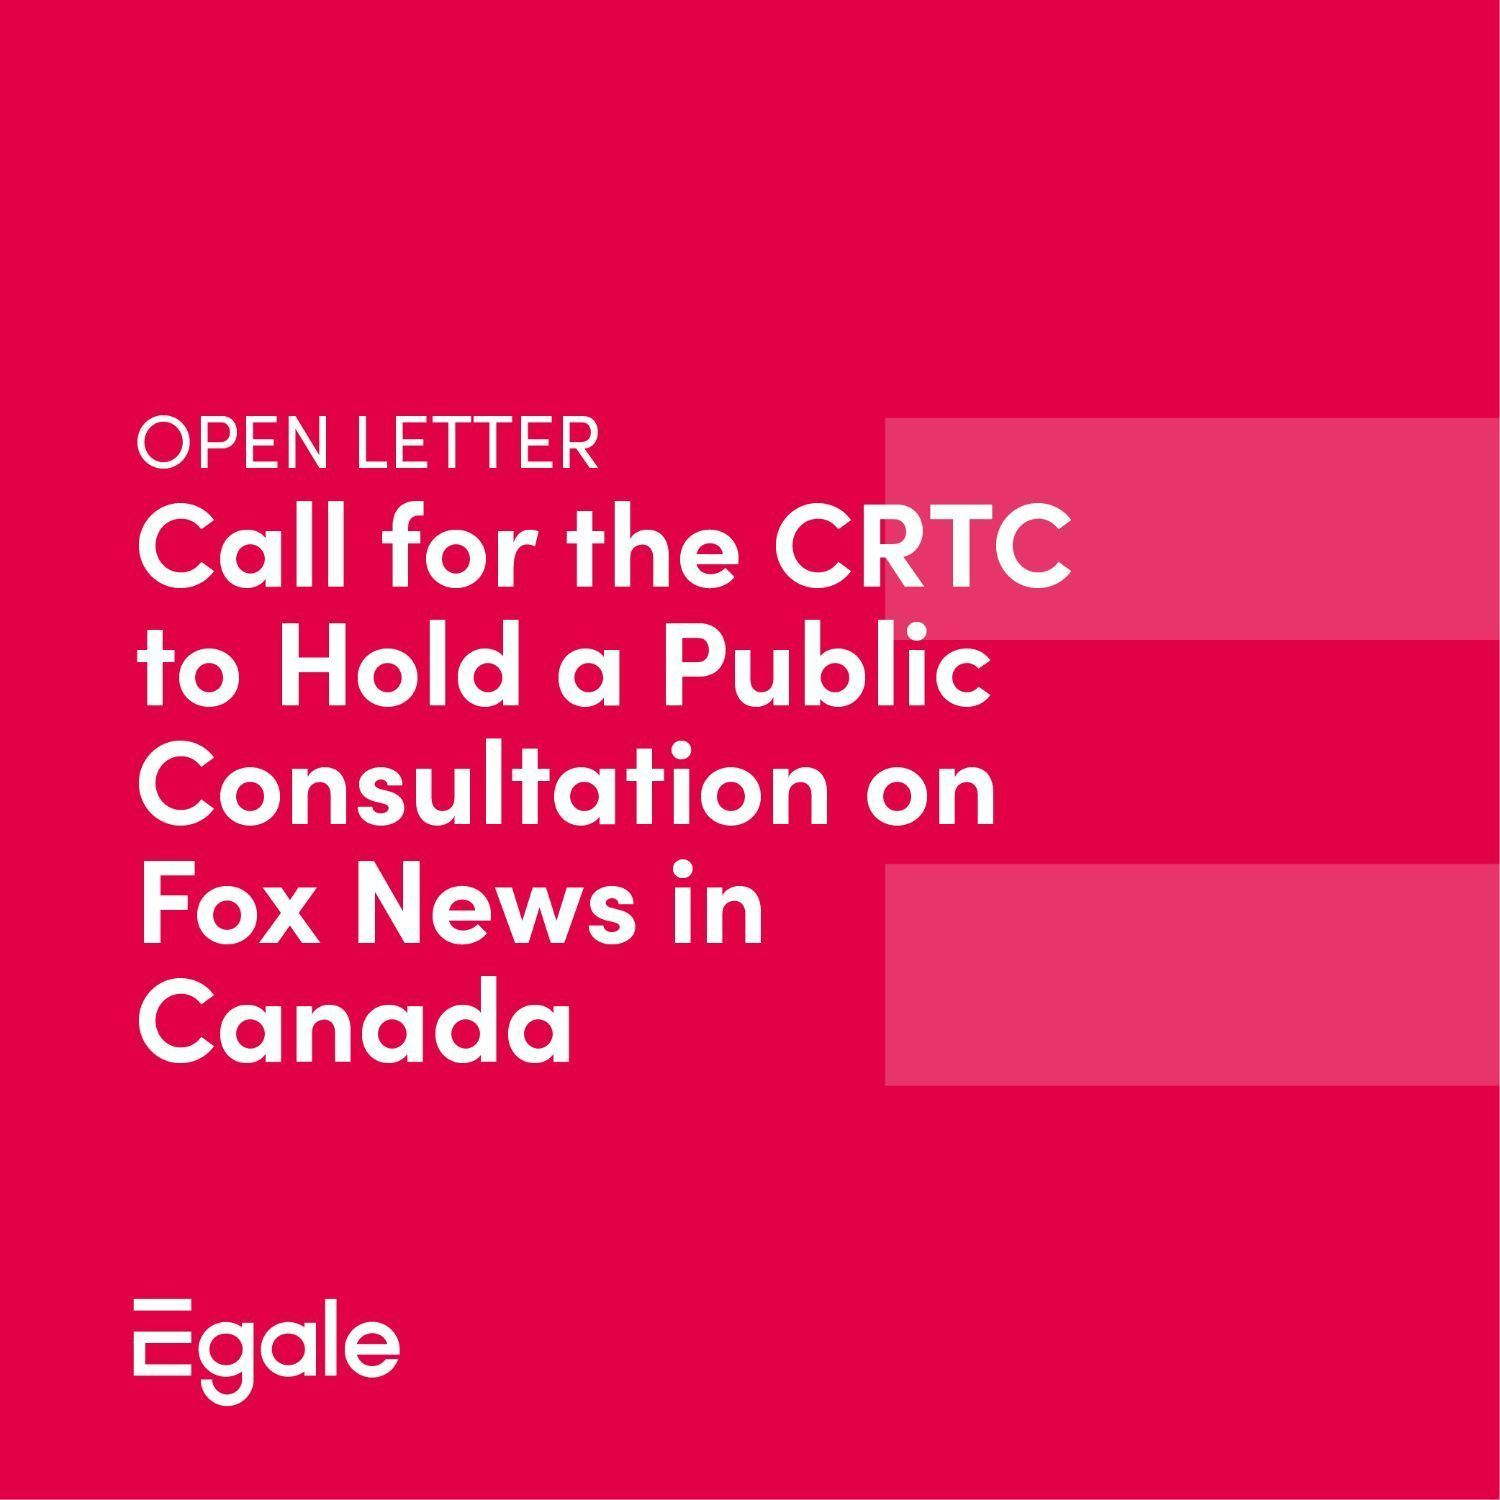 Ppen letter, call for the CRTC to hold a public consultation on Fox News in Canada